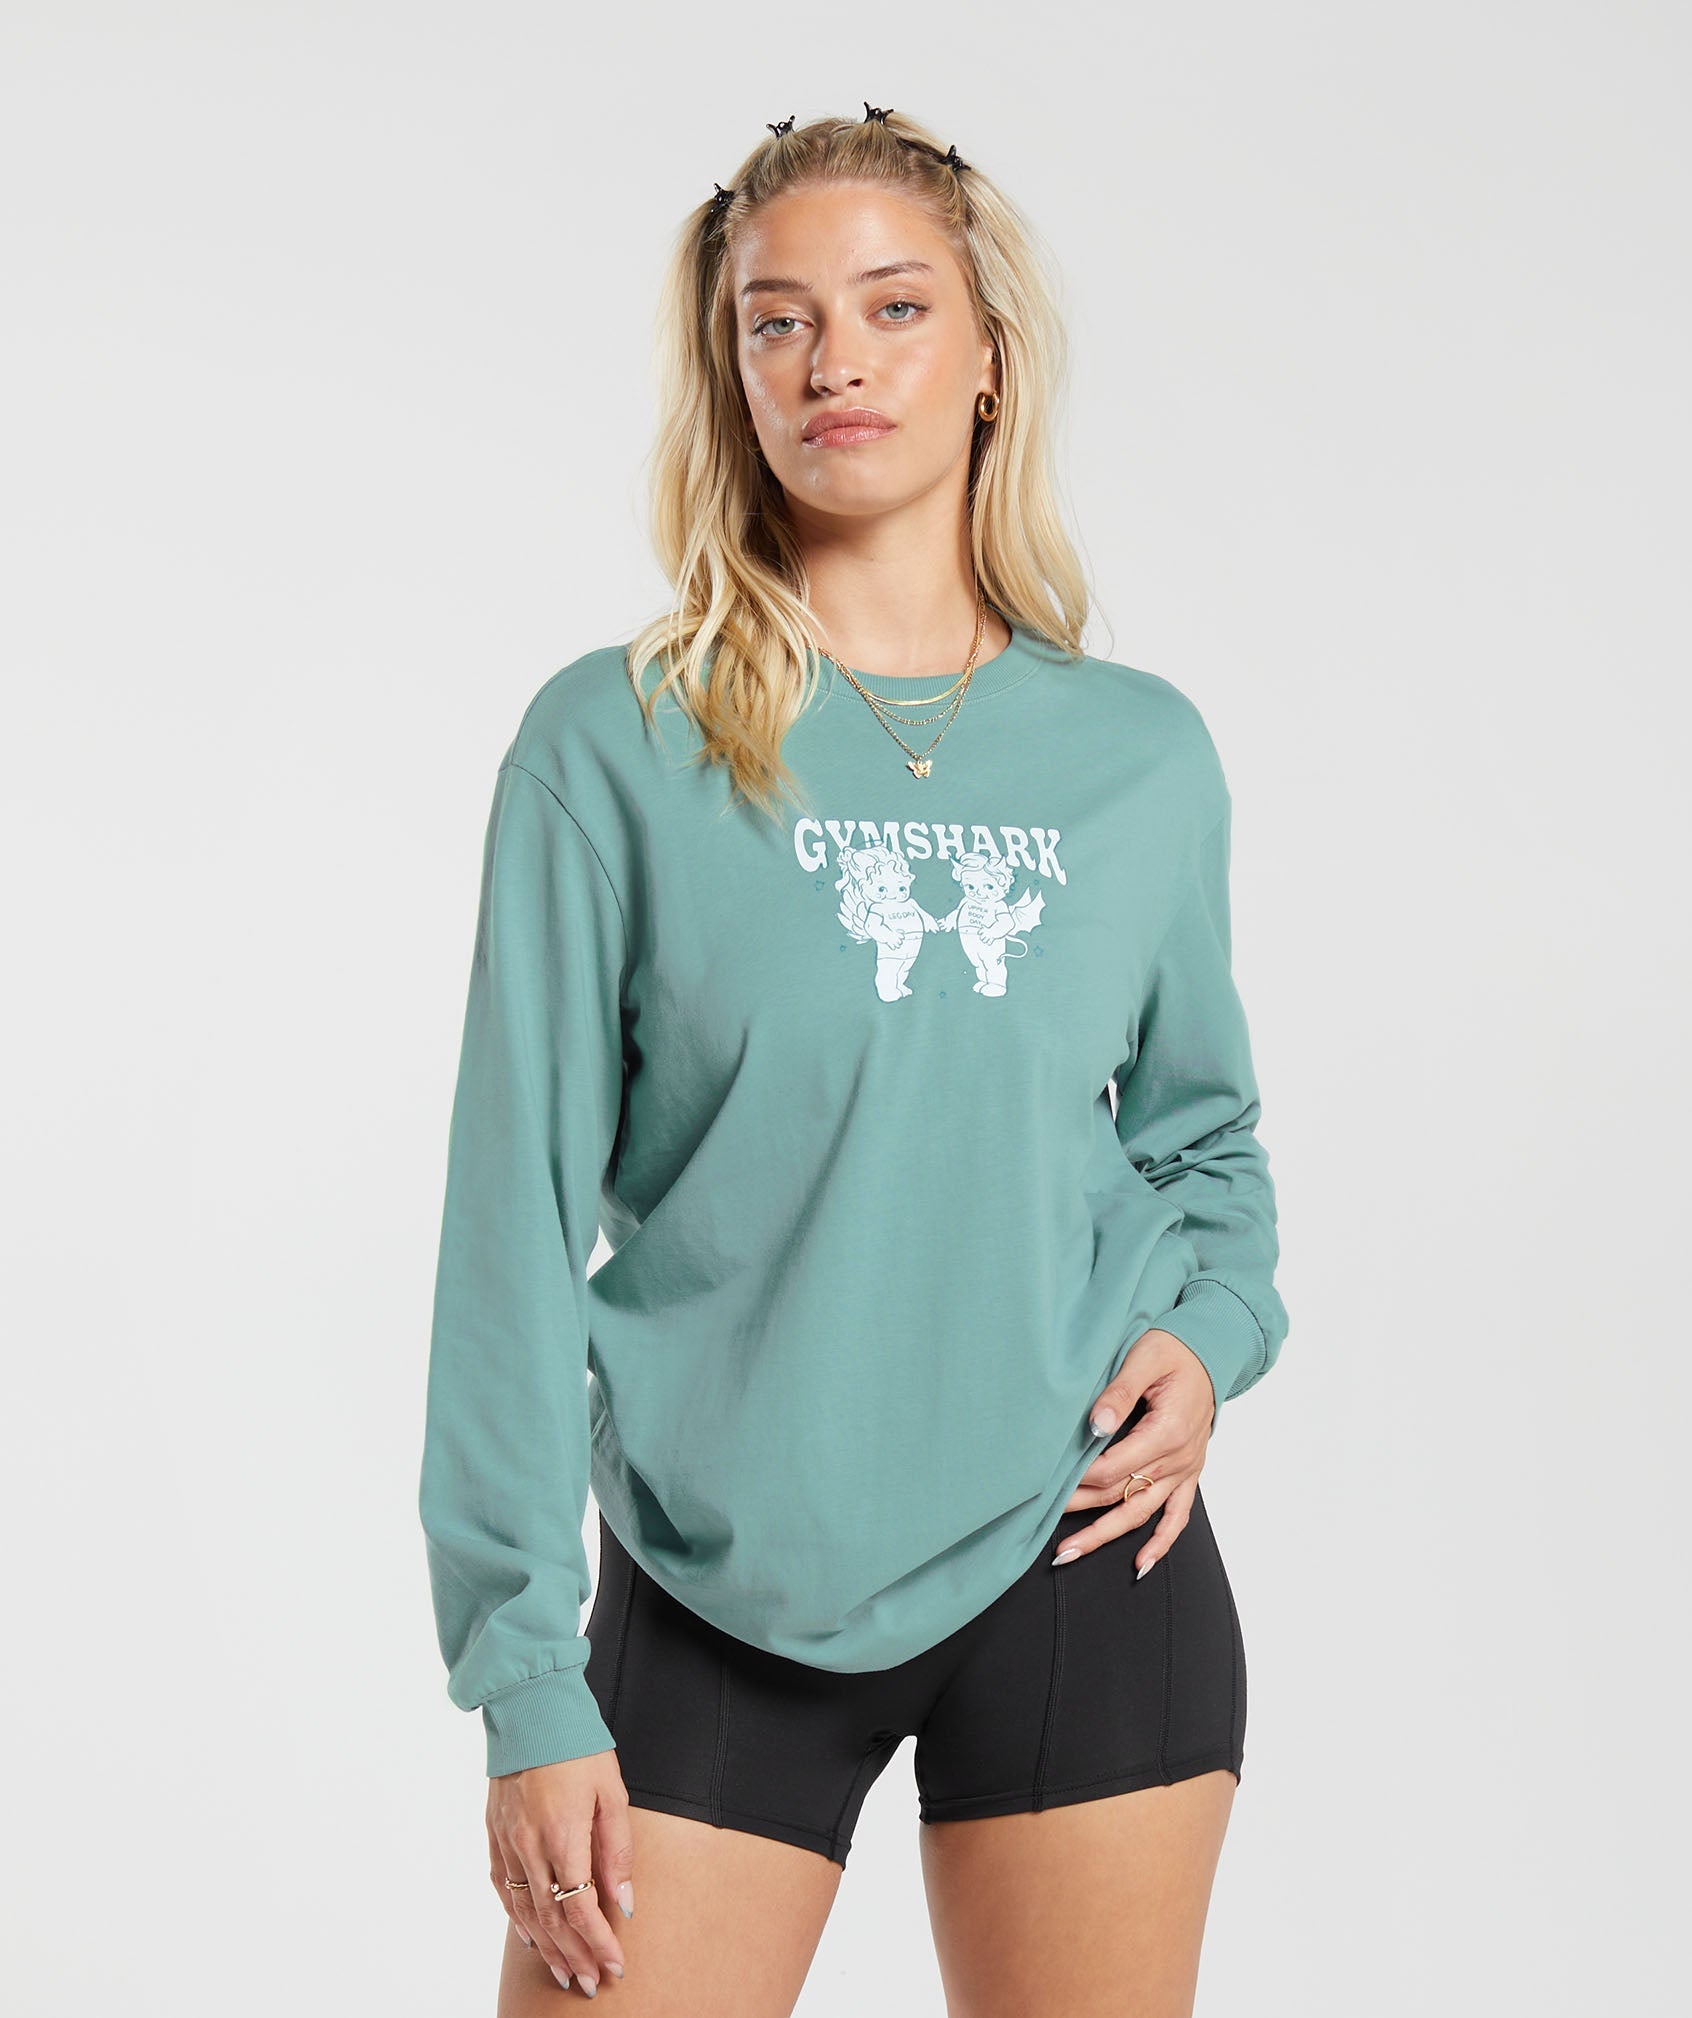 Cherub Graphic Long Sleeve Top in Duck Egg Blue - view 1